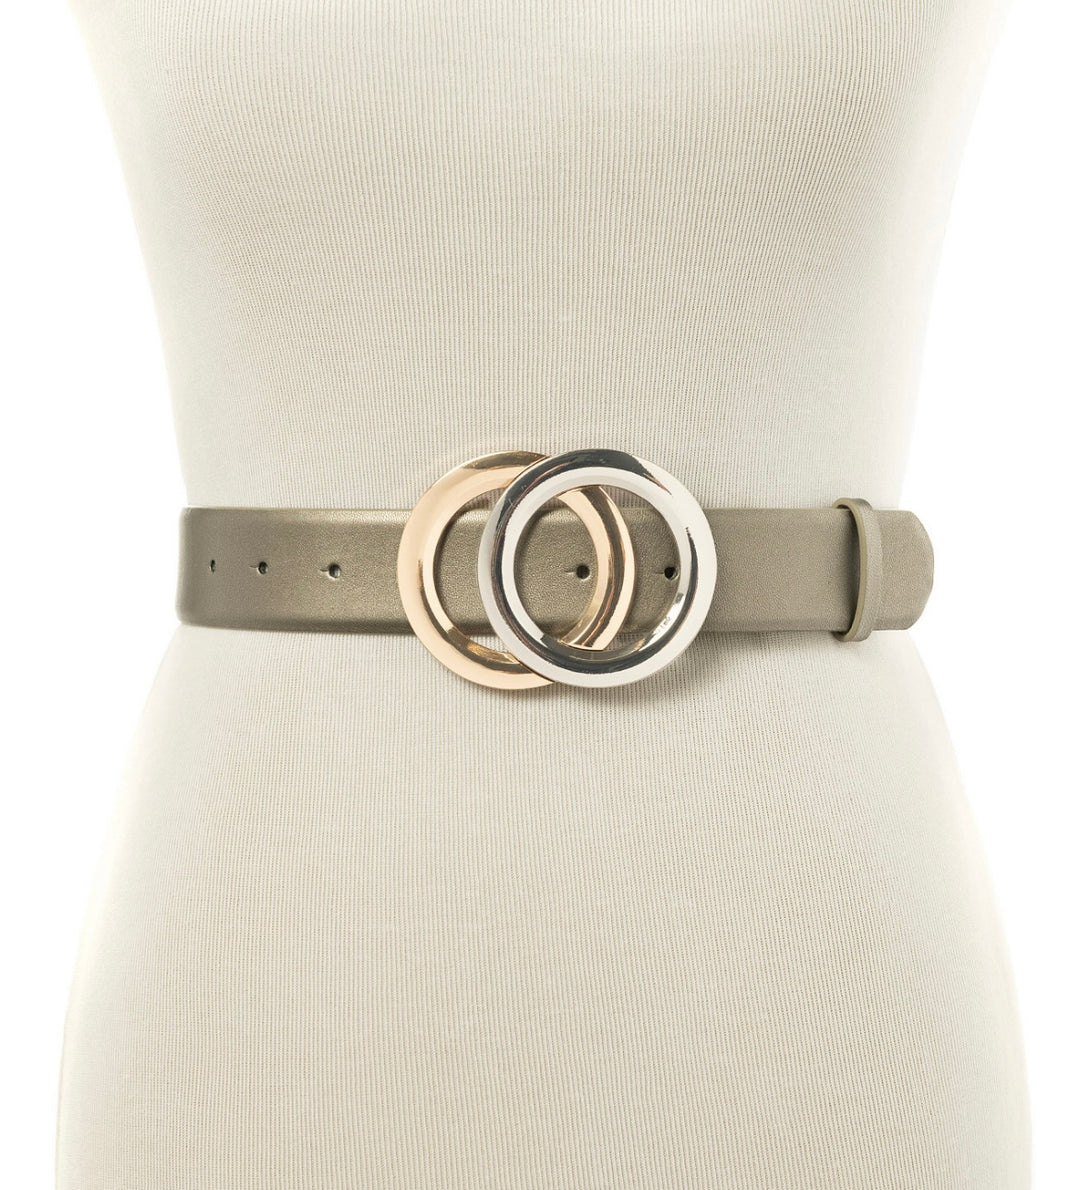 INC International Concepts Double-Circle Buckle Belt Pewter Gold and Silver Tone